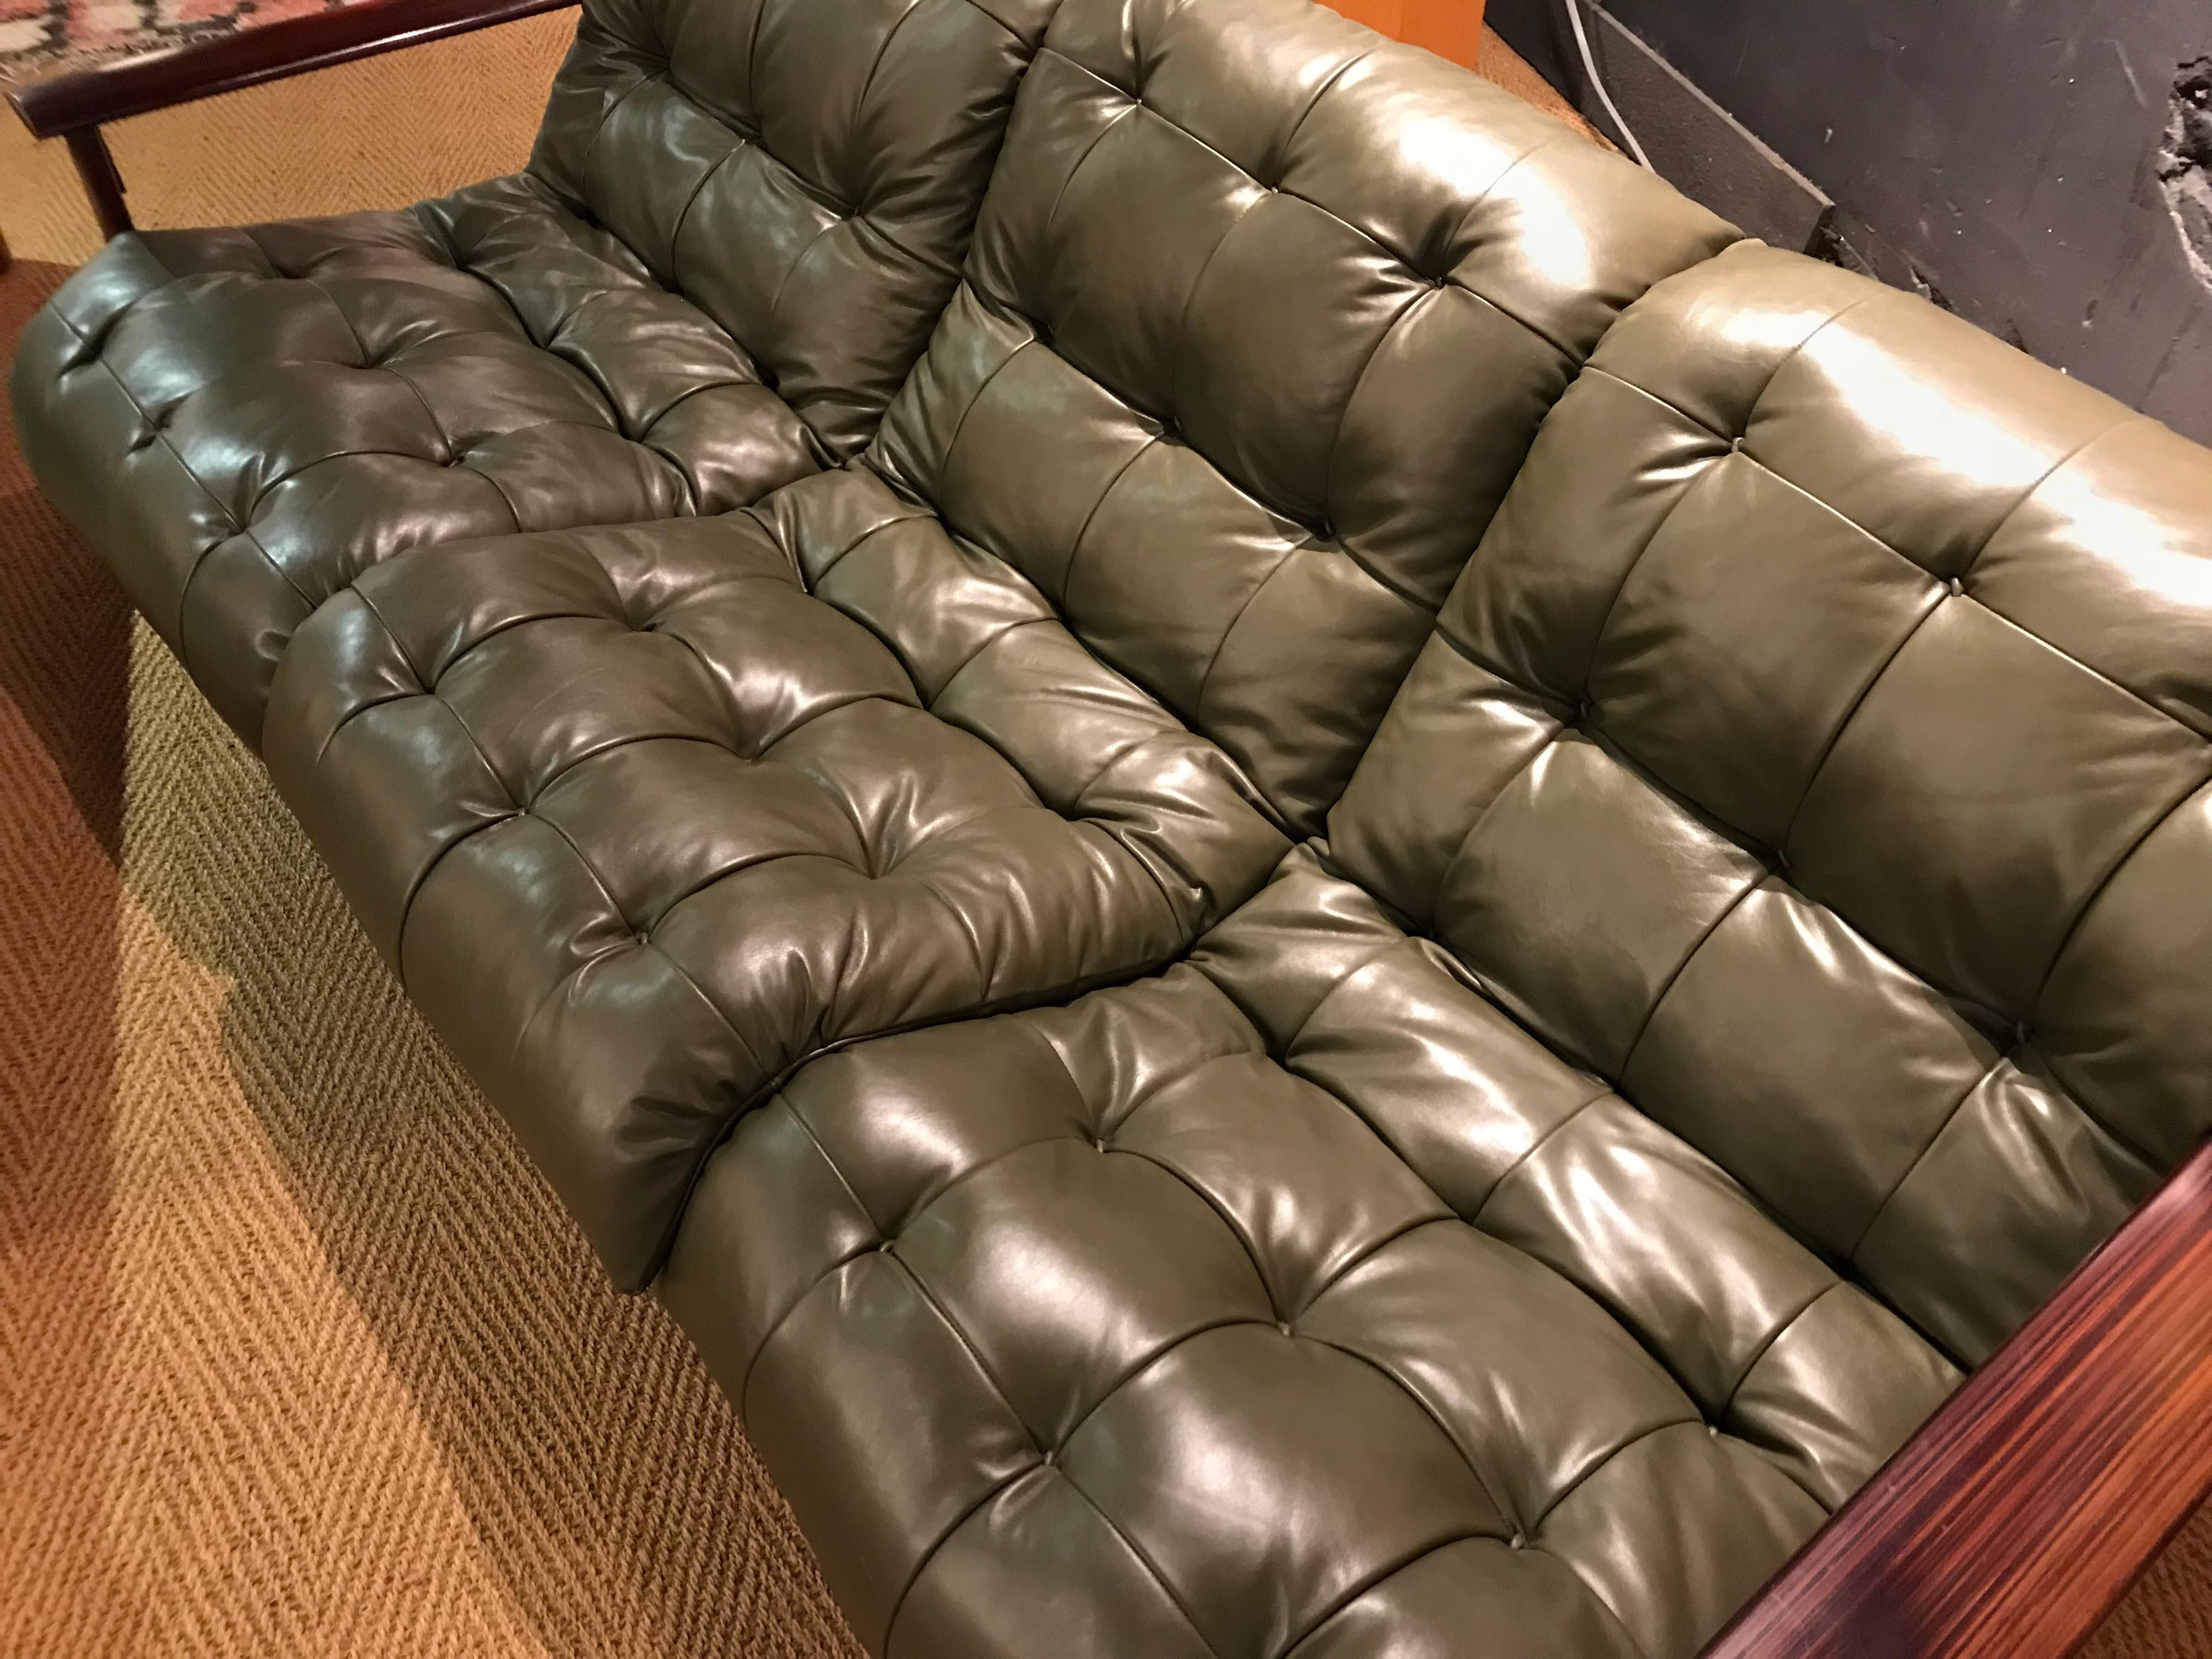 Lounge sofa by Percival Lafer in tufted olive leather upholstery. Very good vintage condition, upholstery and leather strapping in excellent condition for age and use.